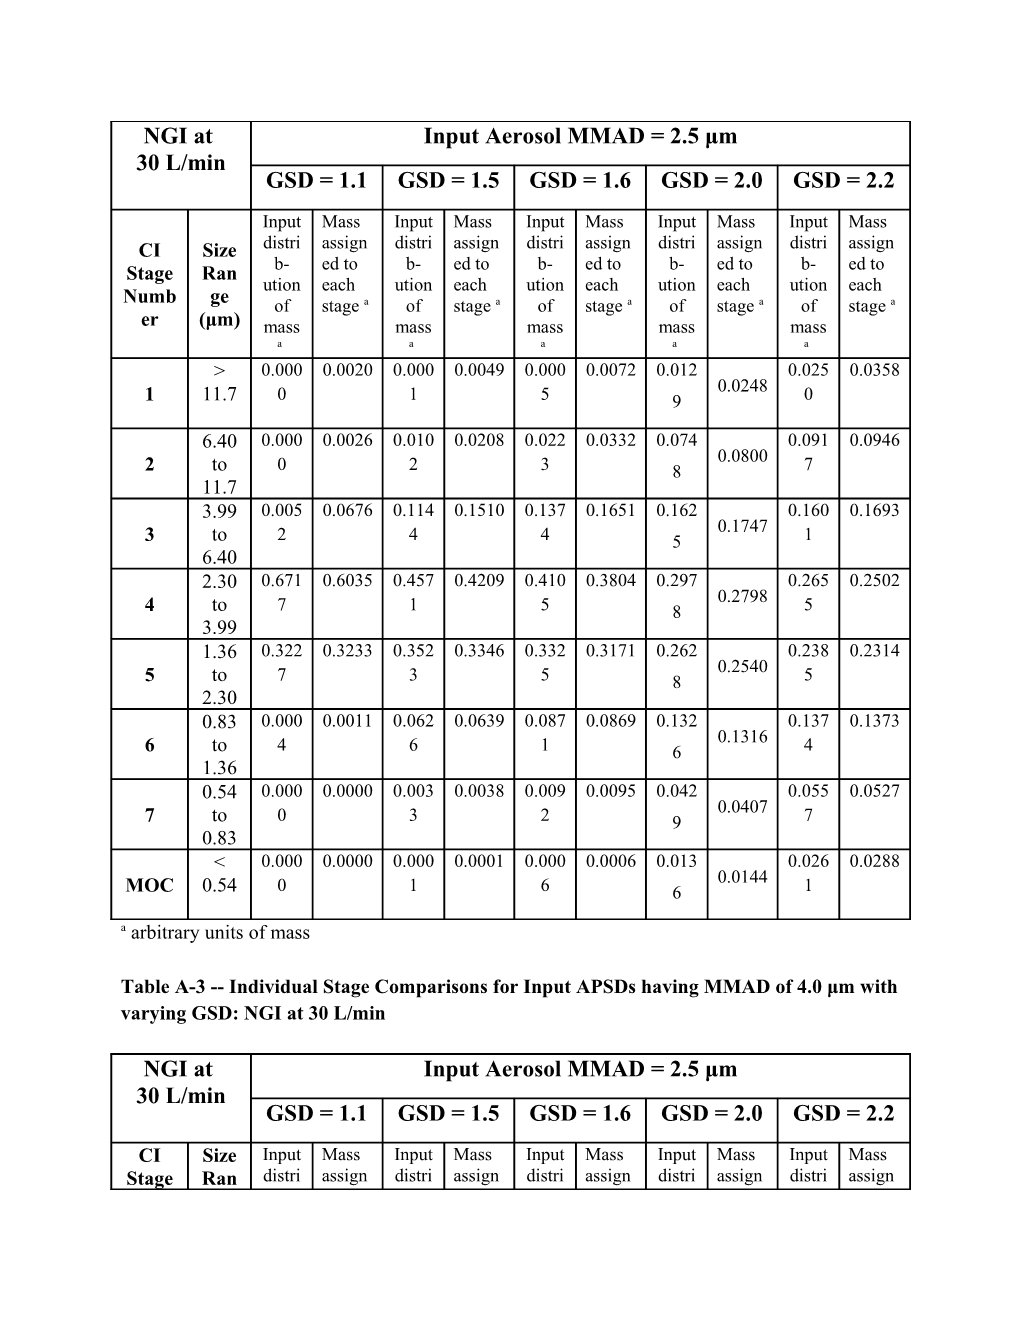 Table A1: Individual Stage Comparisons for Input Apsds Having MMAD of 1.1 Μm with Varying